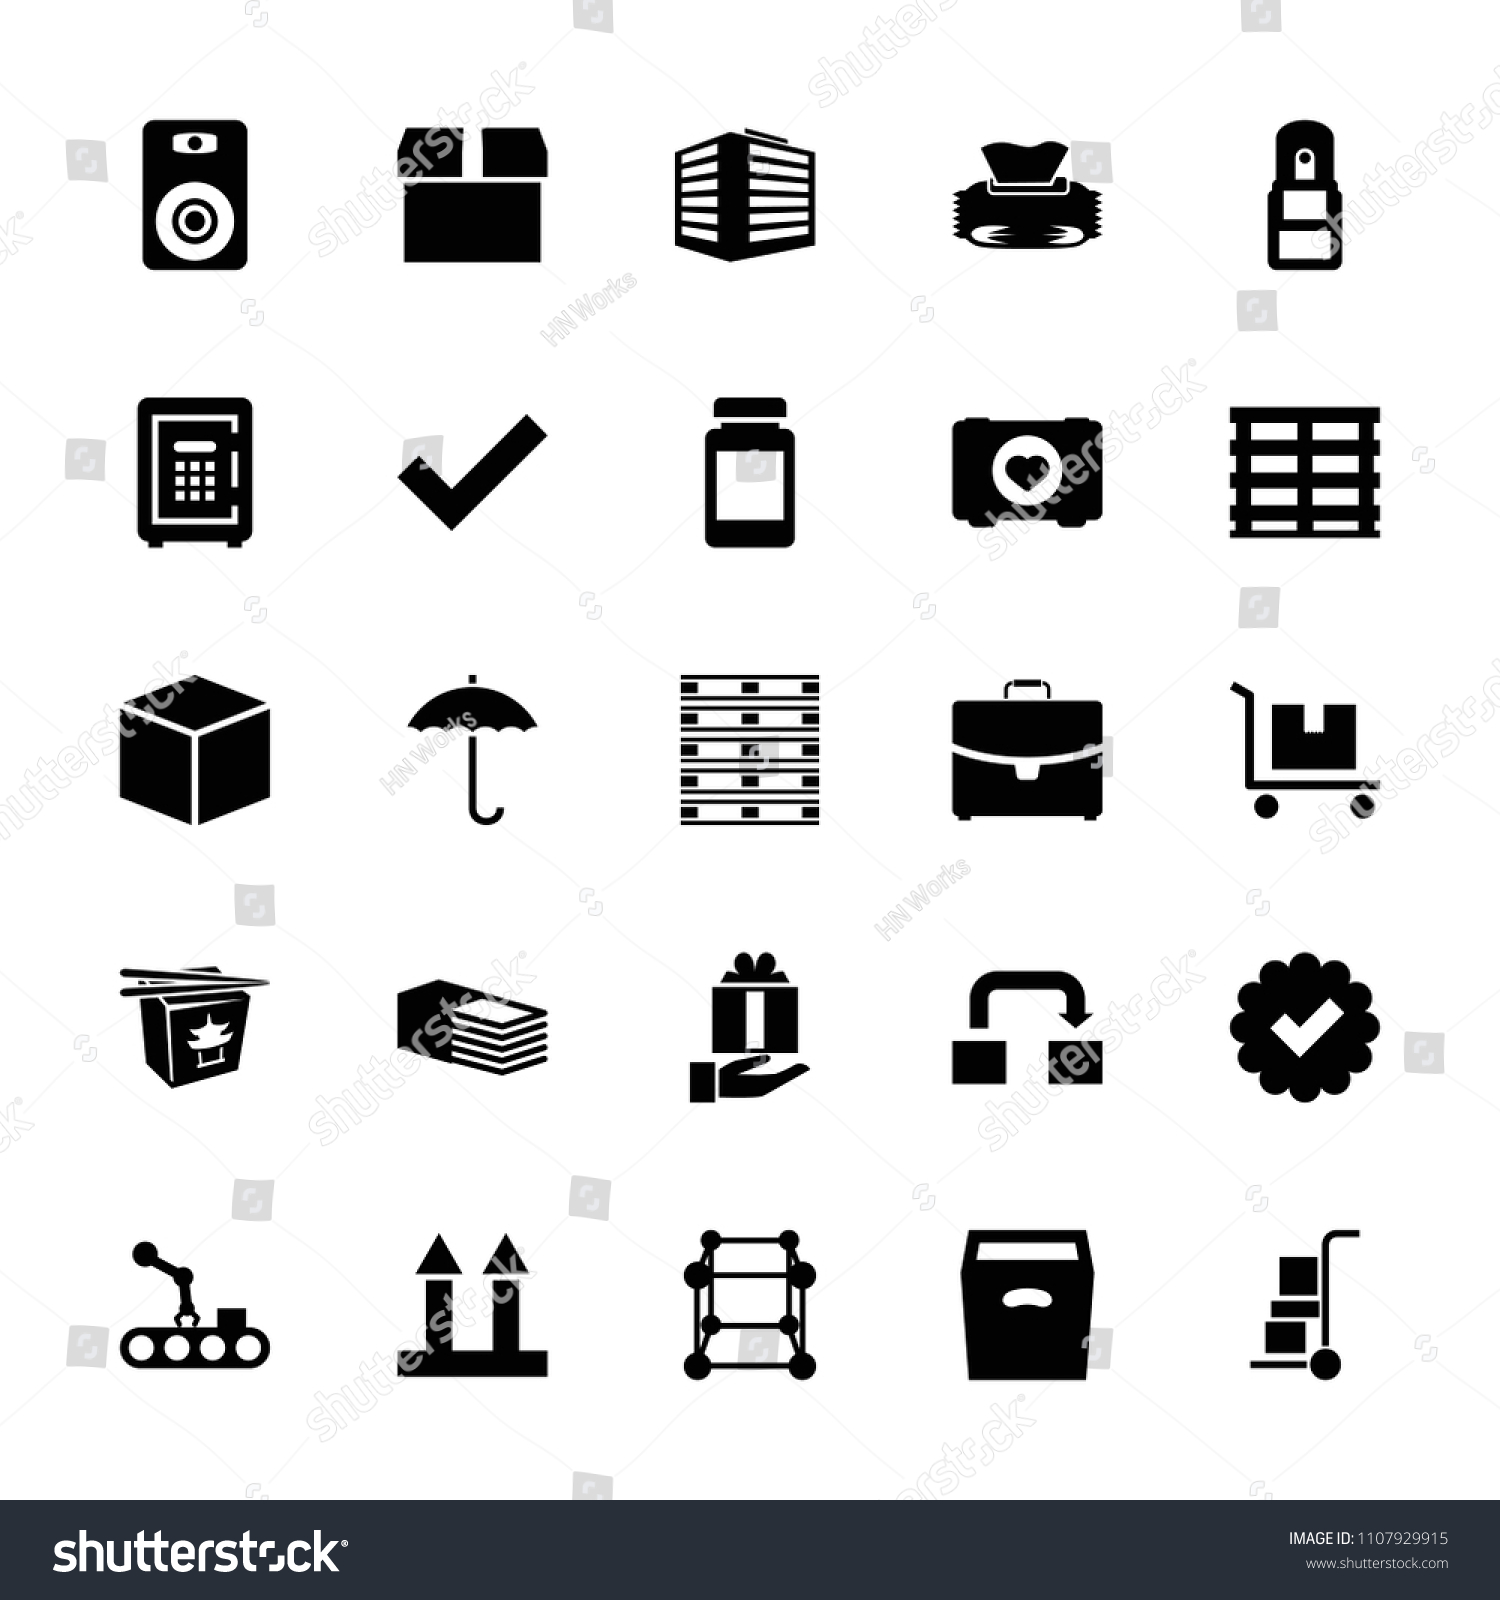 Box Icon Collection 25 Box Filled Stock Vector Royalty Free Shutterstock